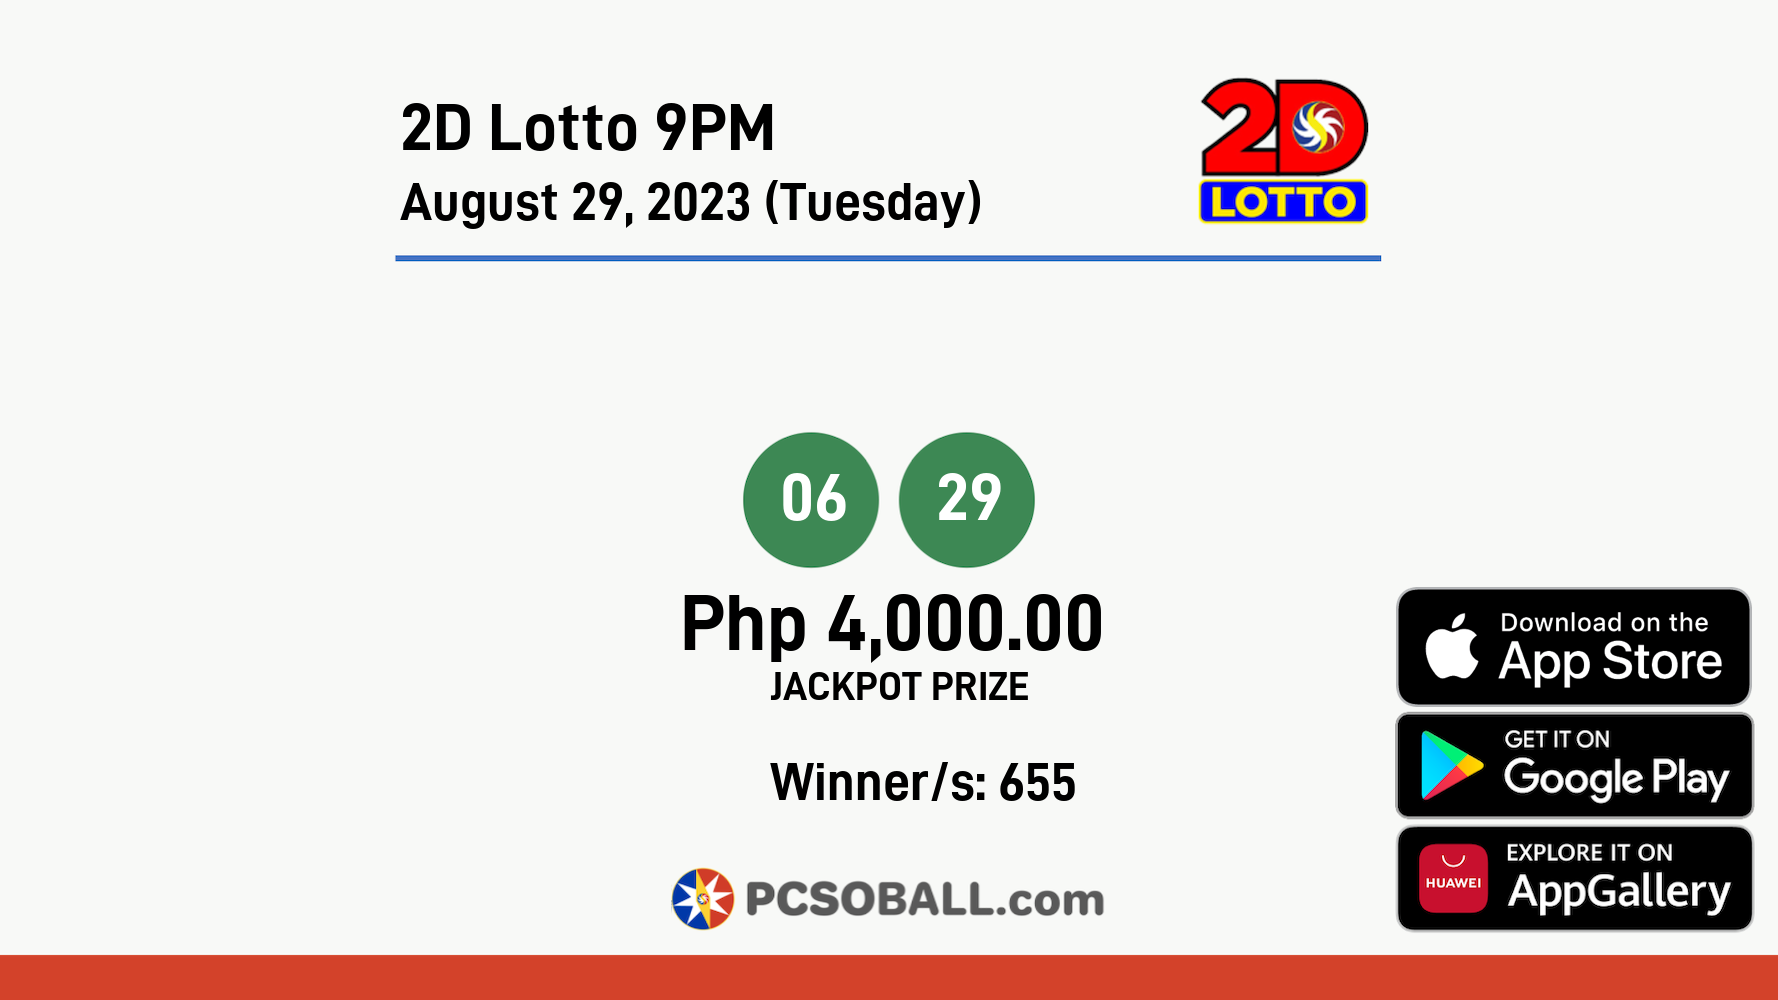 2D Lotto 9PM August 29, 2023 (Tuesday) Result